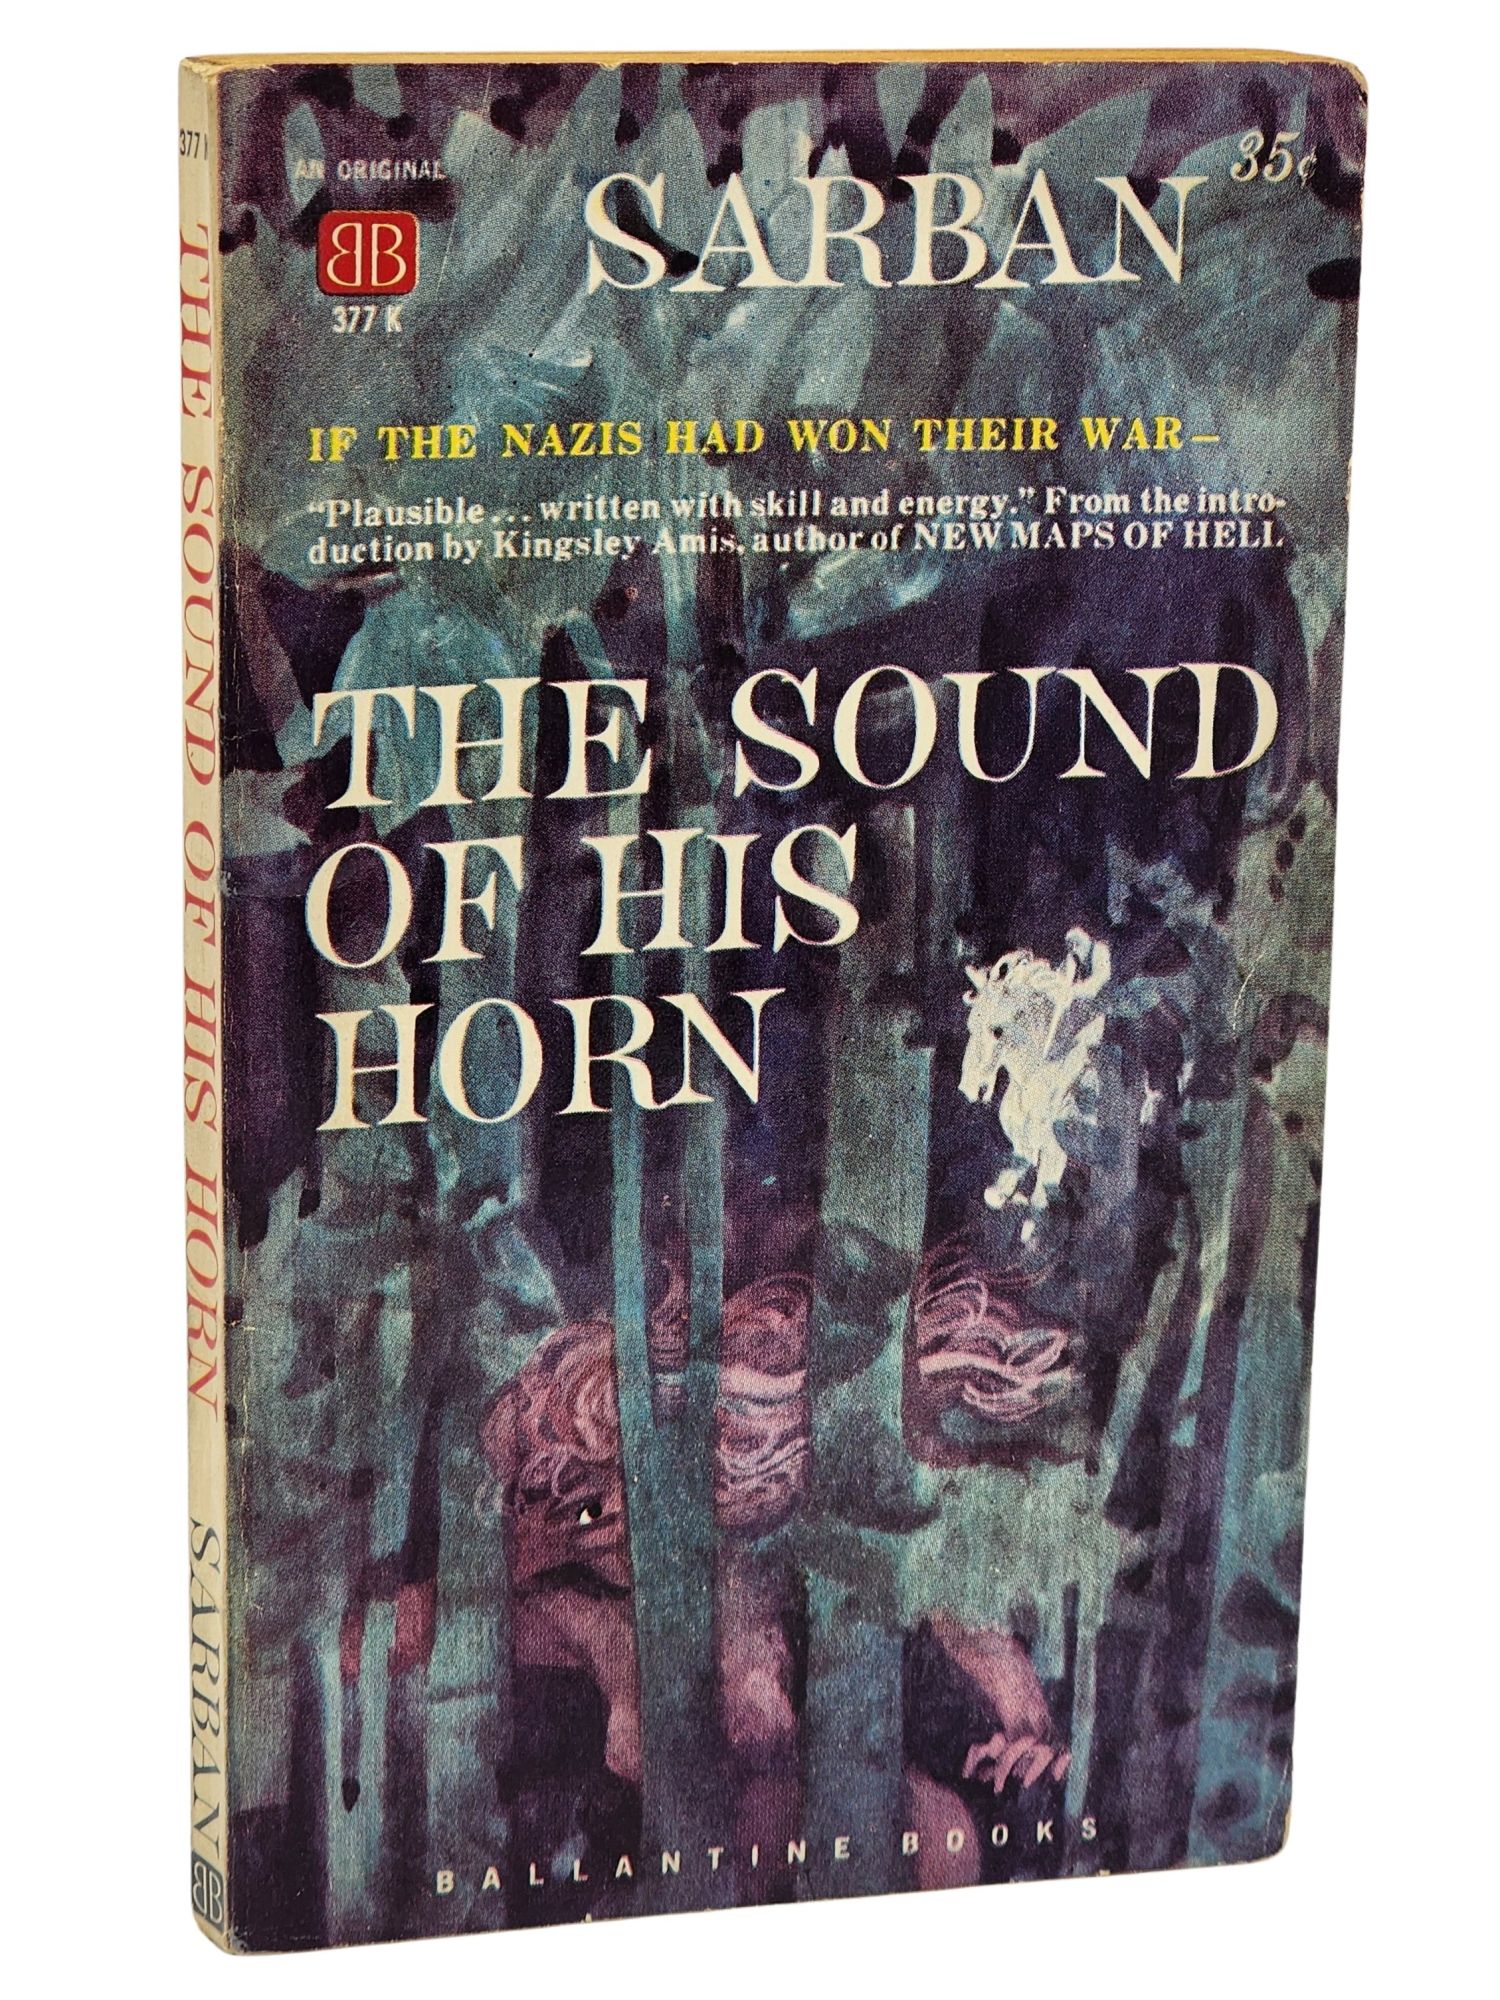 [Book #50883] THE SOUND OF HIS HORN. Sarban, John William Wall.